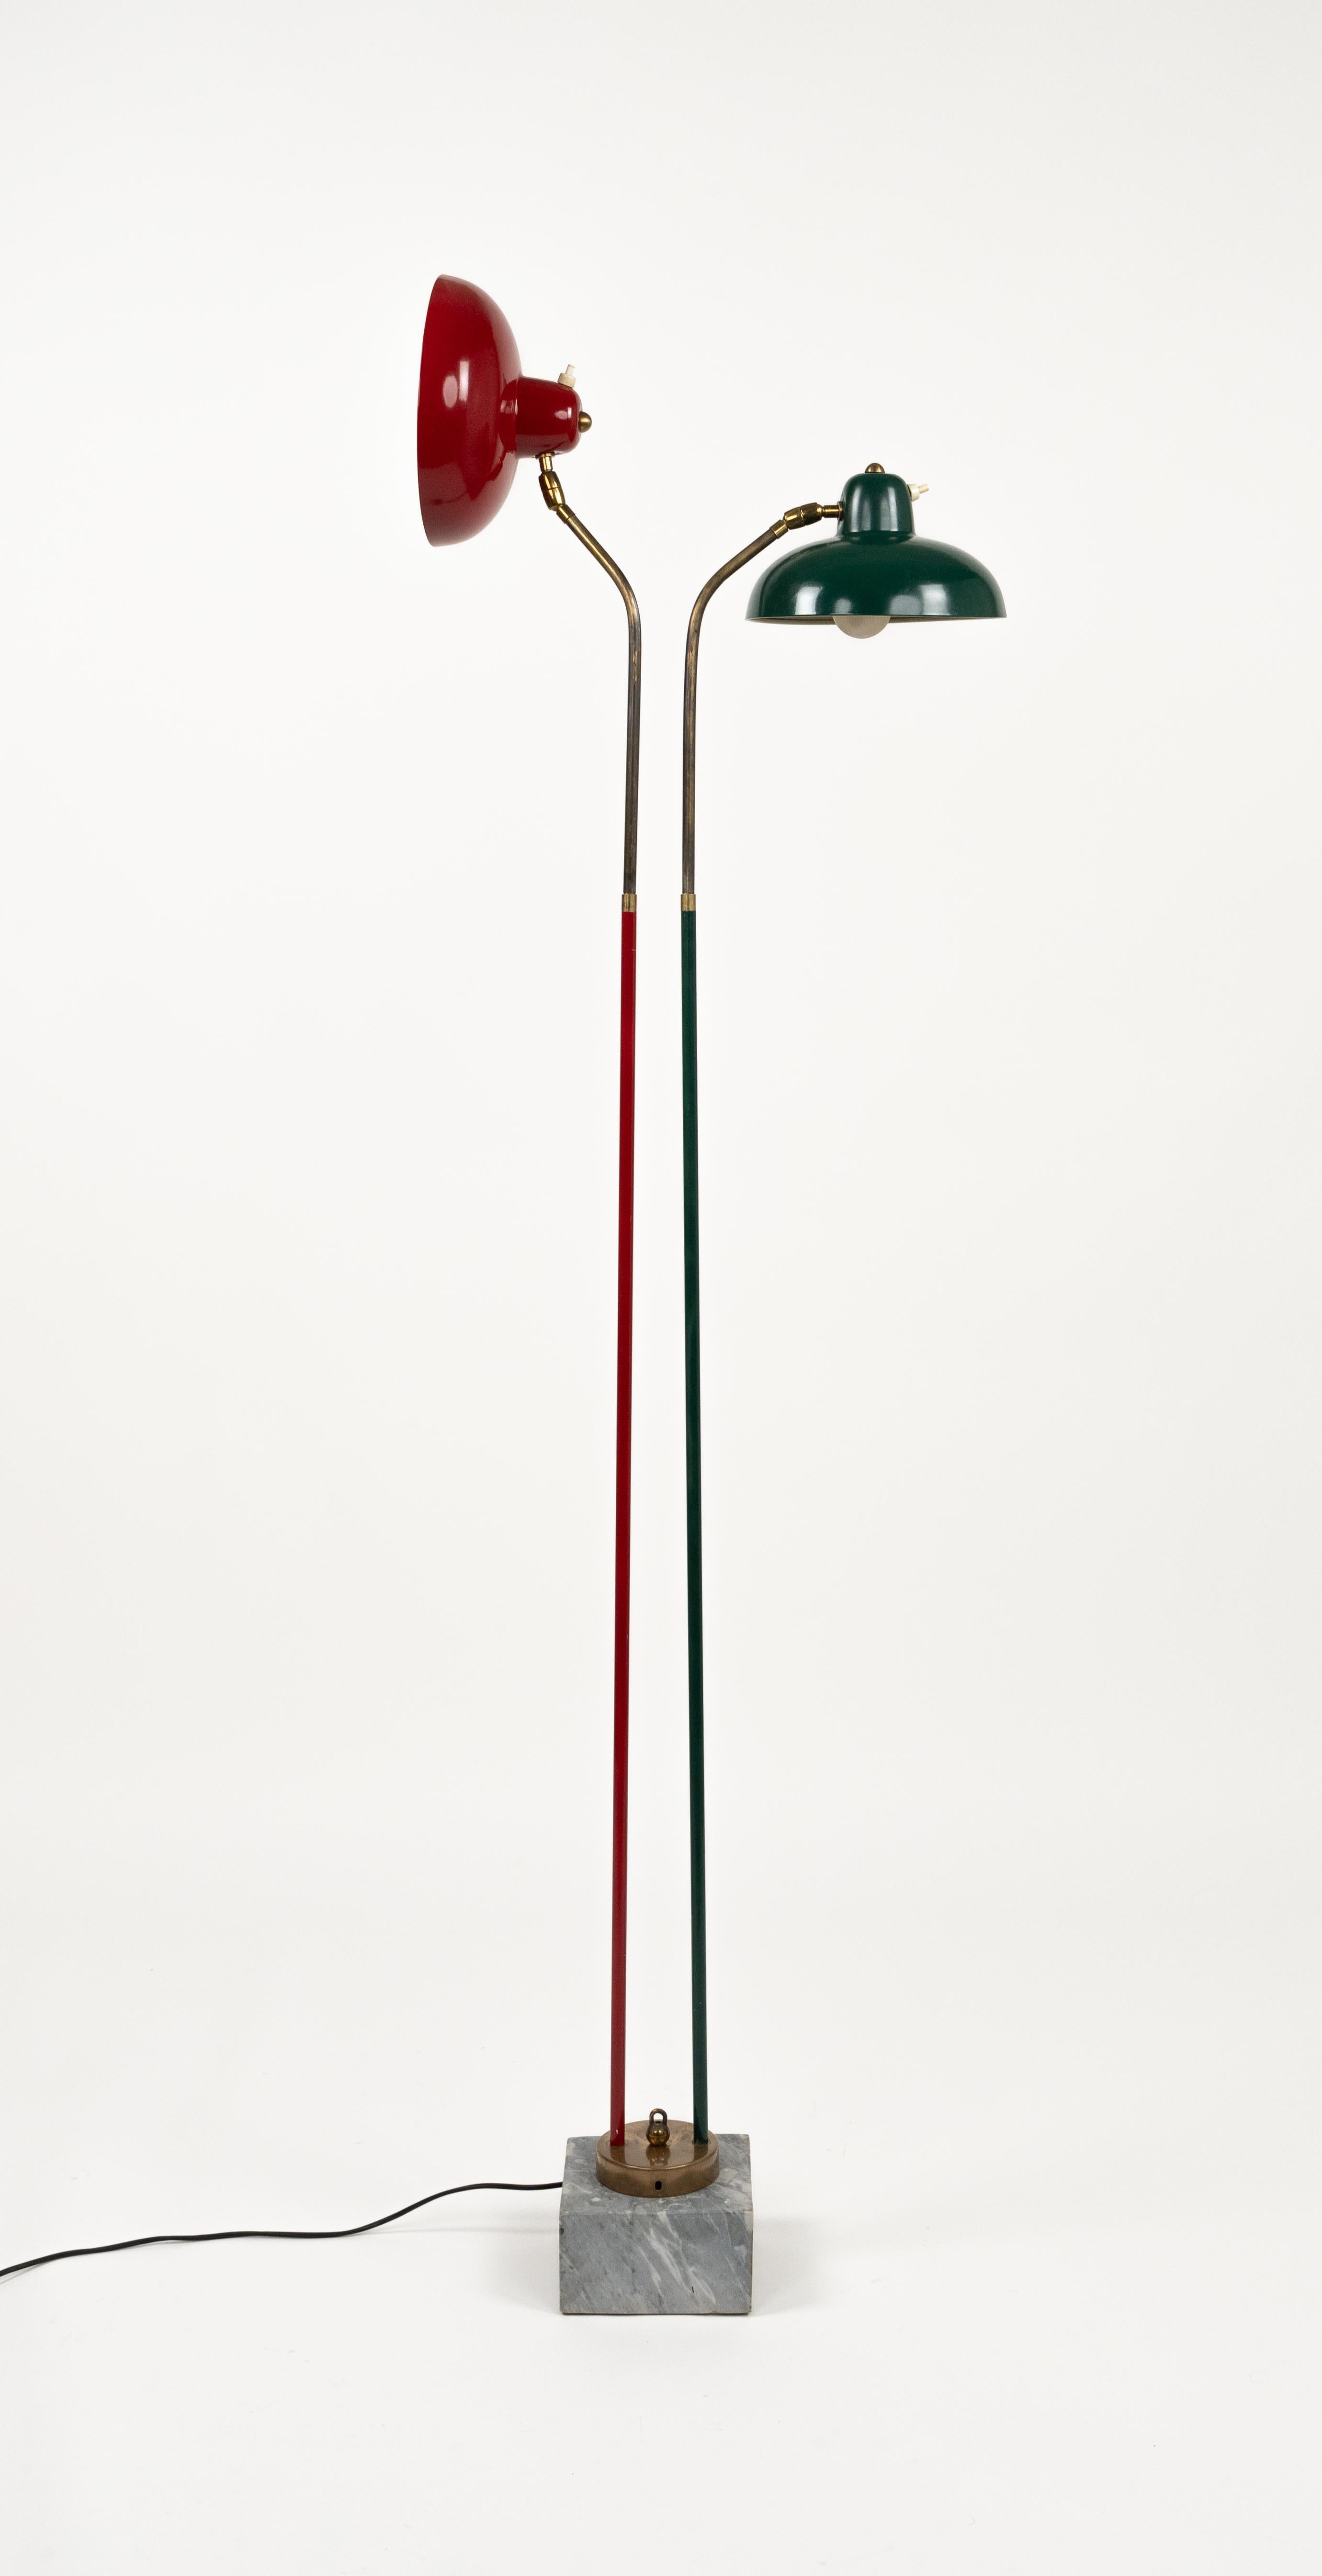 Floor Lamp in Marble, Lacquered Metal and Brass Stilnovo Style, Italy 1950s For Sale 4